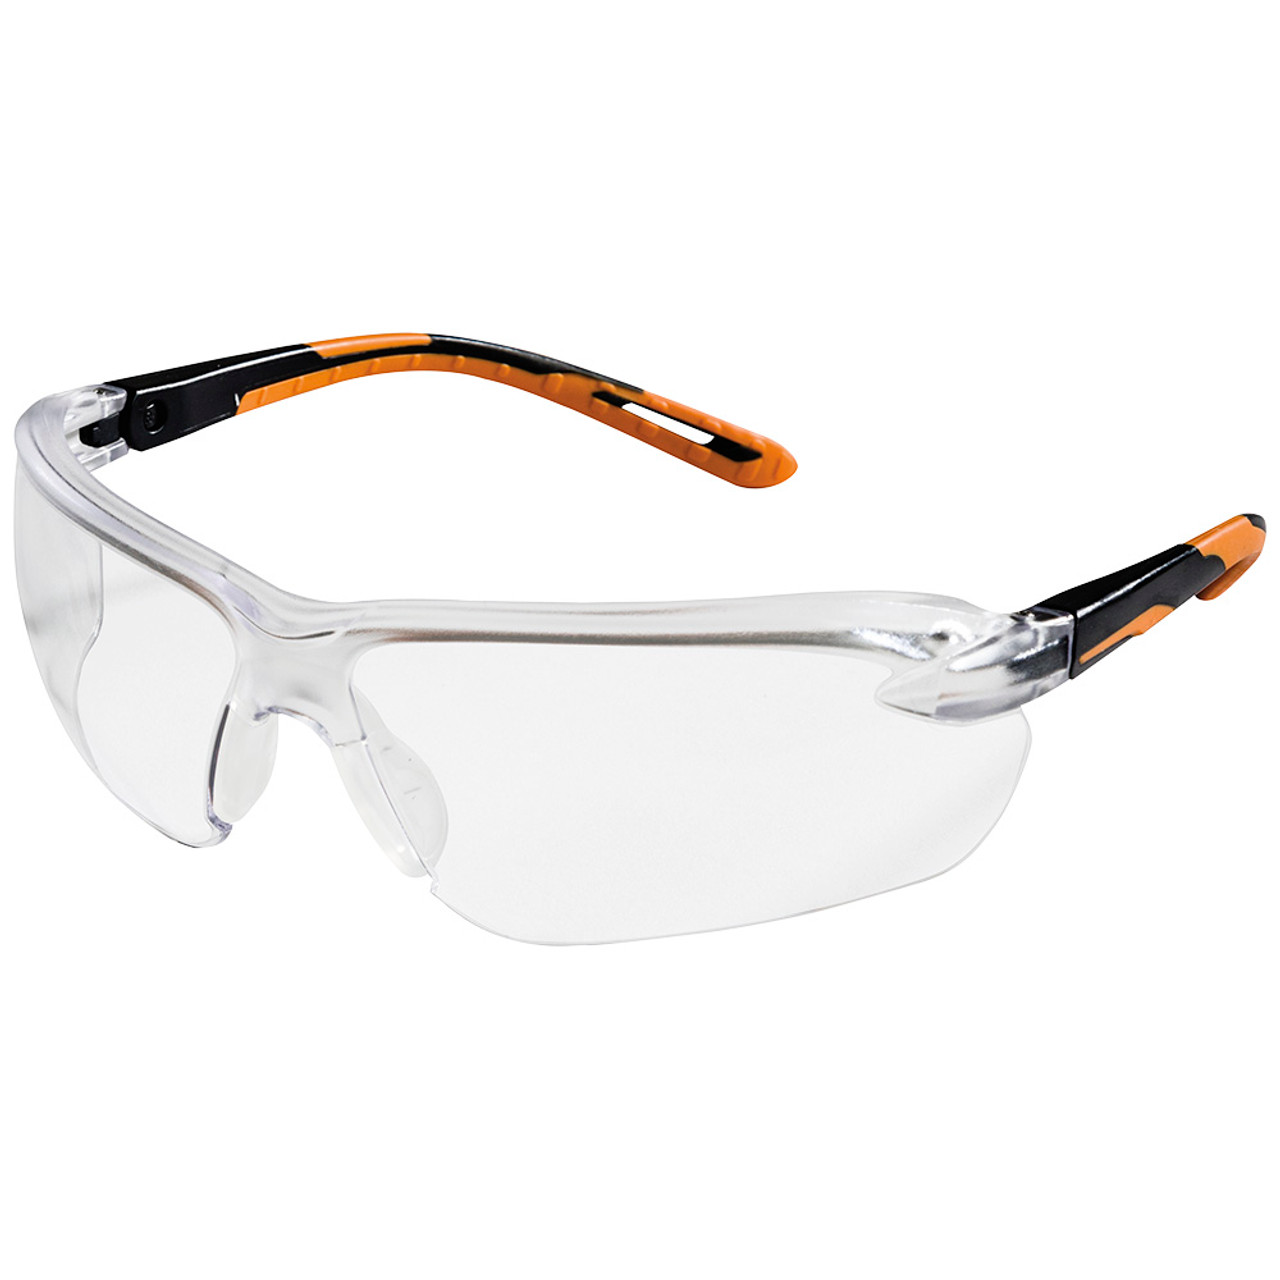 Sellstrom® XM310 Series Hard Coated Wrap Around Safety Glasses - Clear - Orange-Black Arms  S71200